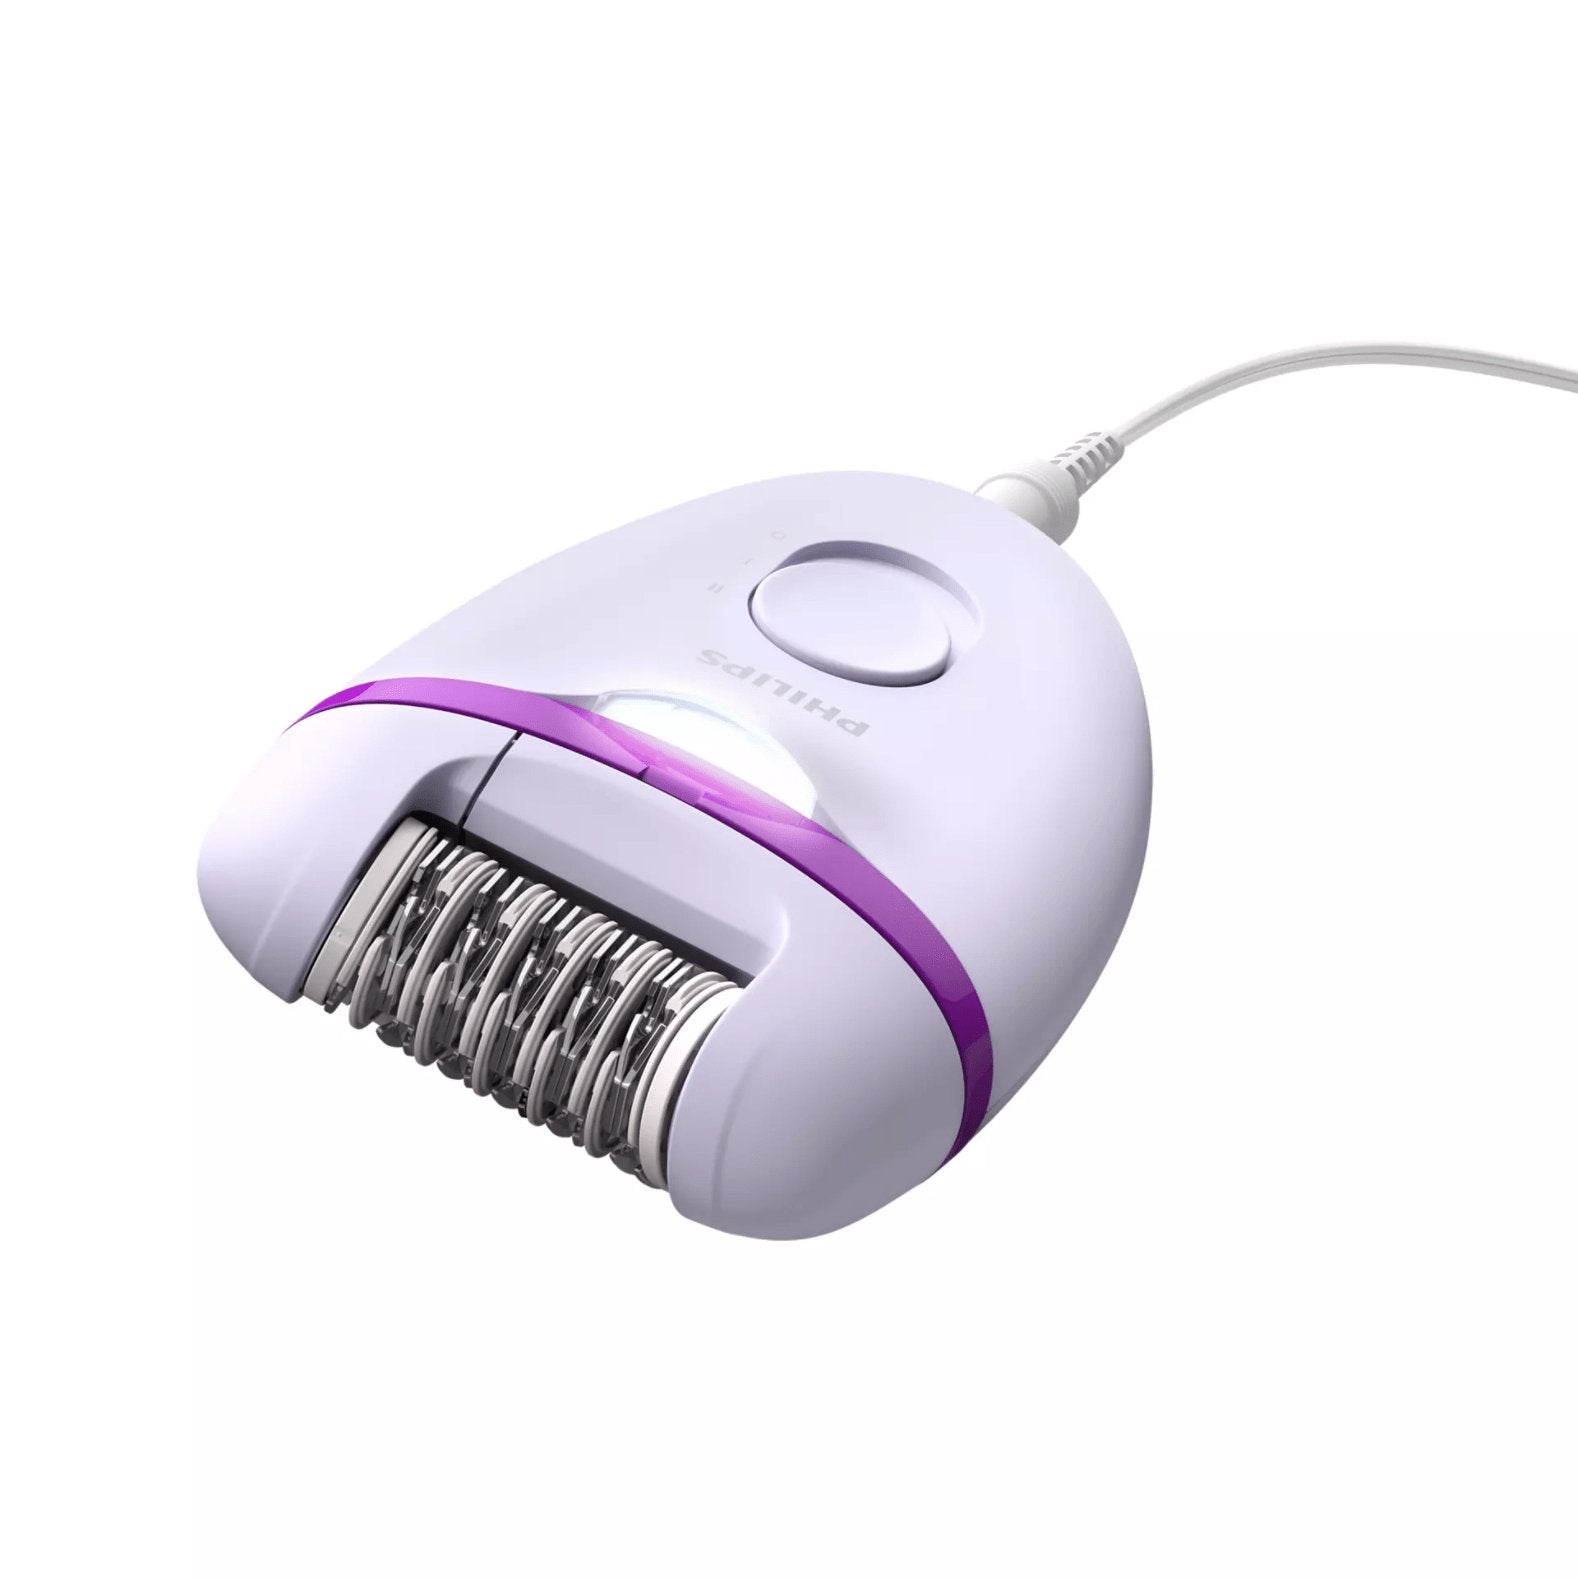 Philips BRE275/00 Satinelle Essential Corded Compact Epilator w/ 4 Accessories - Healthxpress.ie